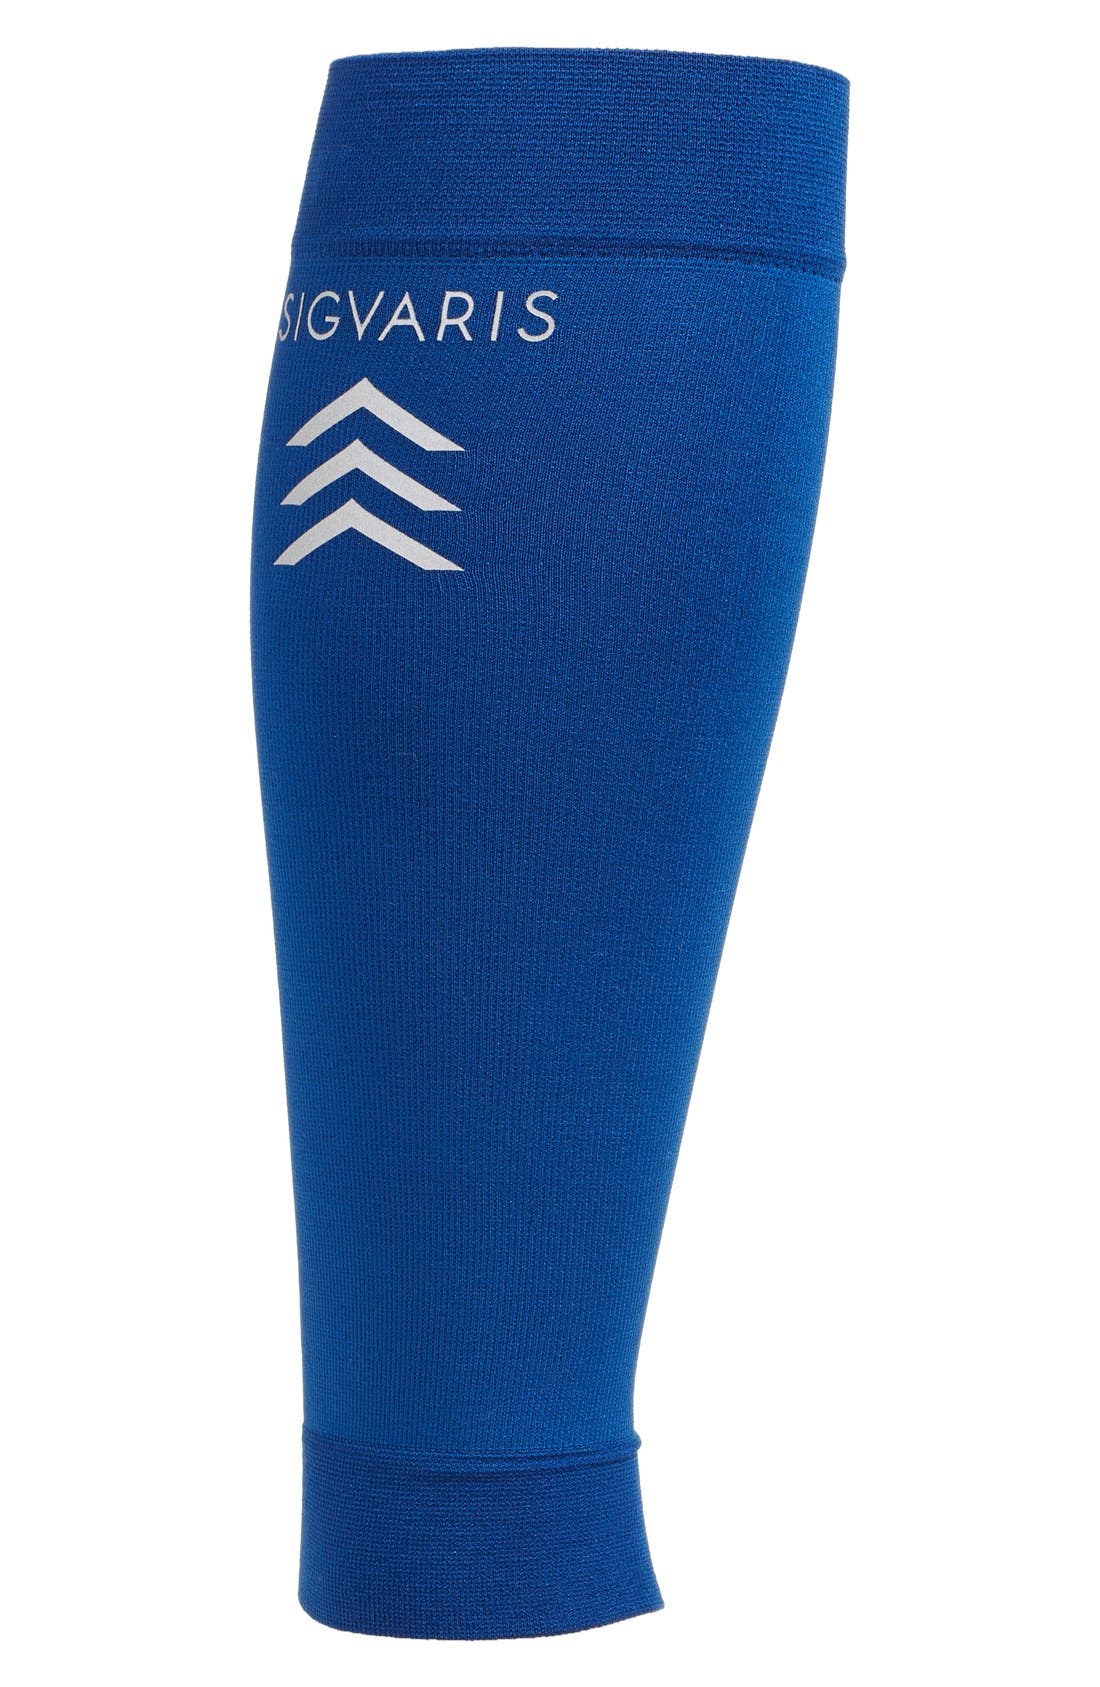 UPC 745129216924 product image for Men's Insignia By Sigvaris 'Sports' Graduated Compression Performance Calf Sleev | upcitemdb.com